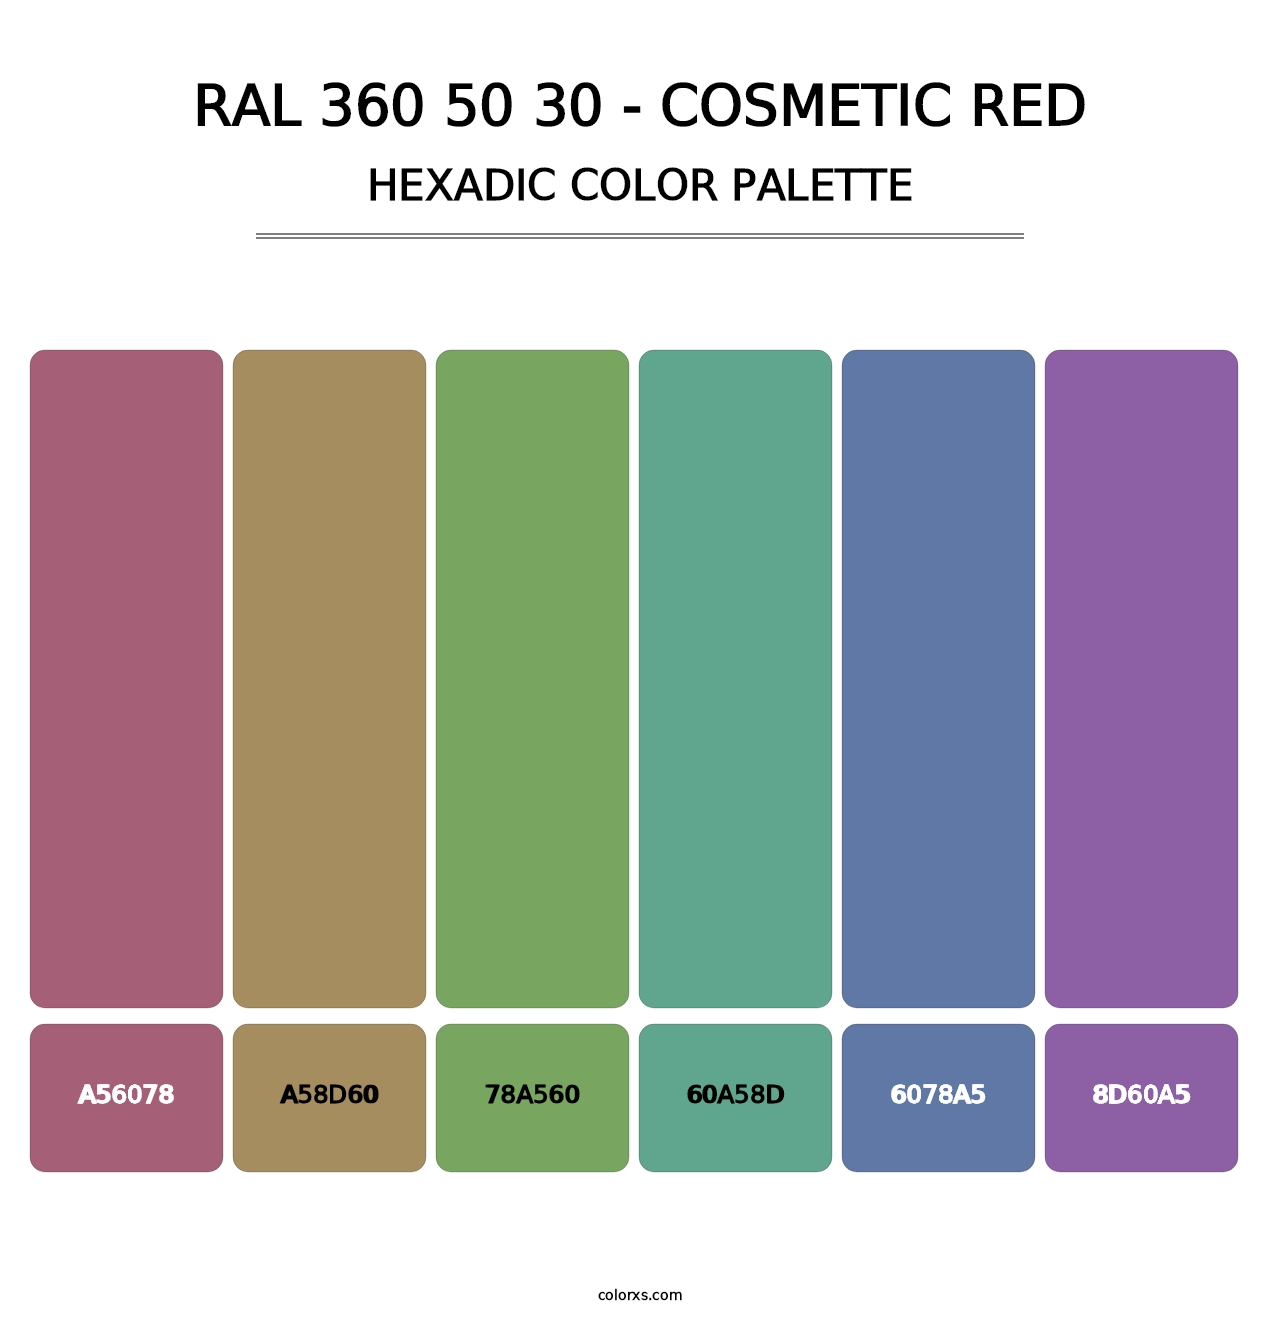 RAL 360 50 30 - Cosmetic Red - Hexadic Color Palette